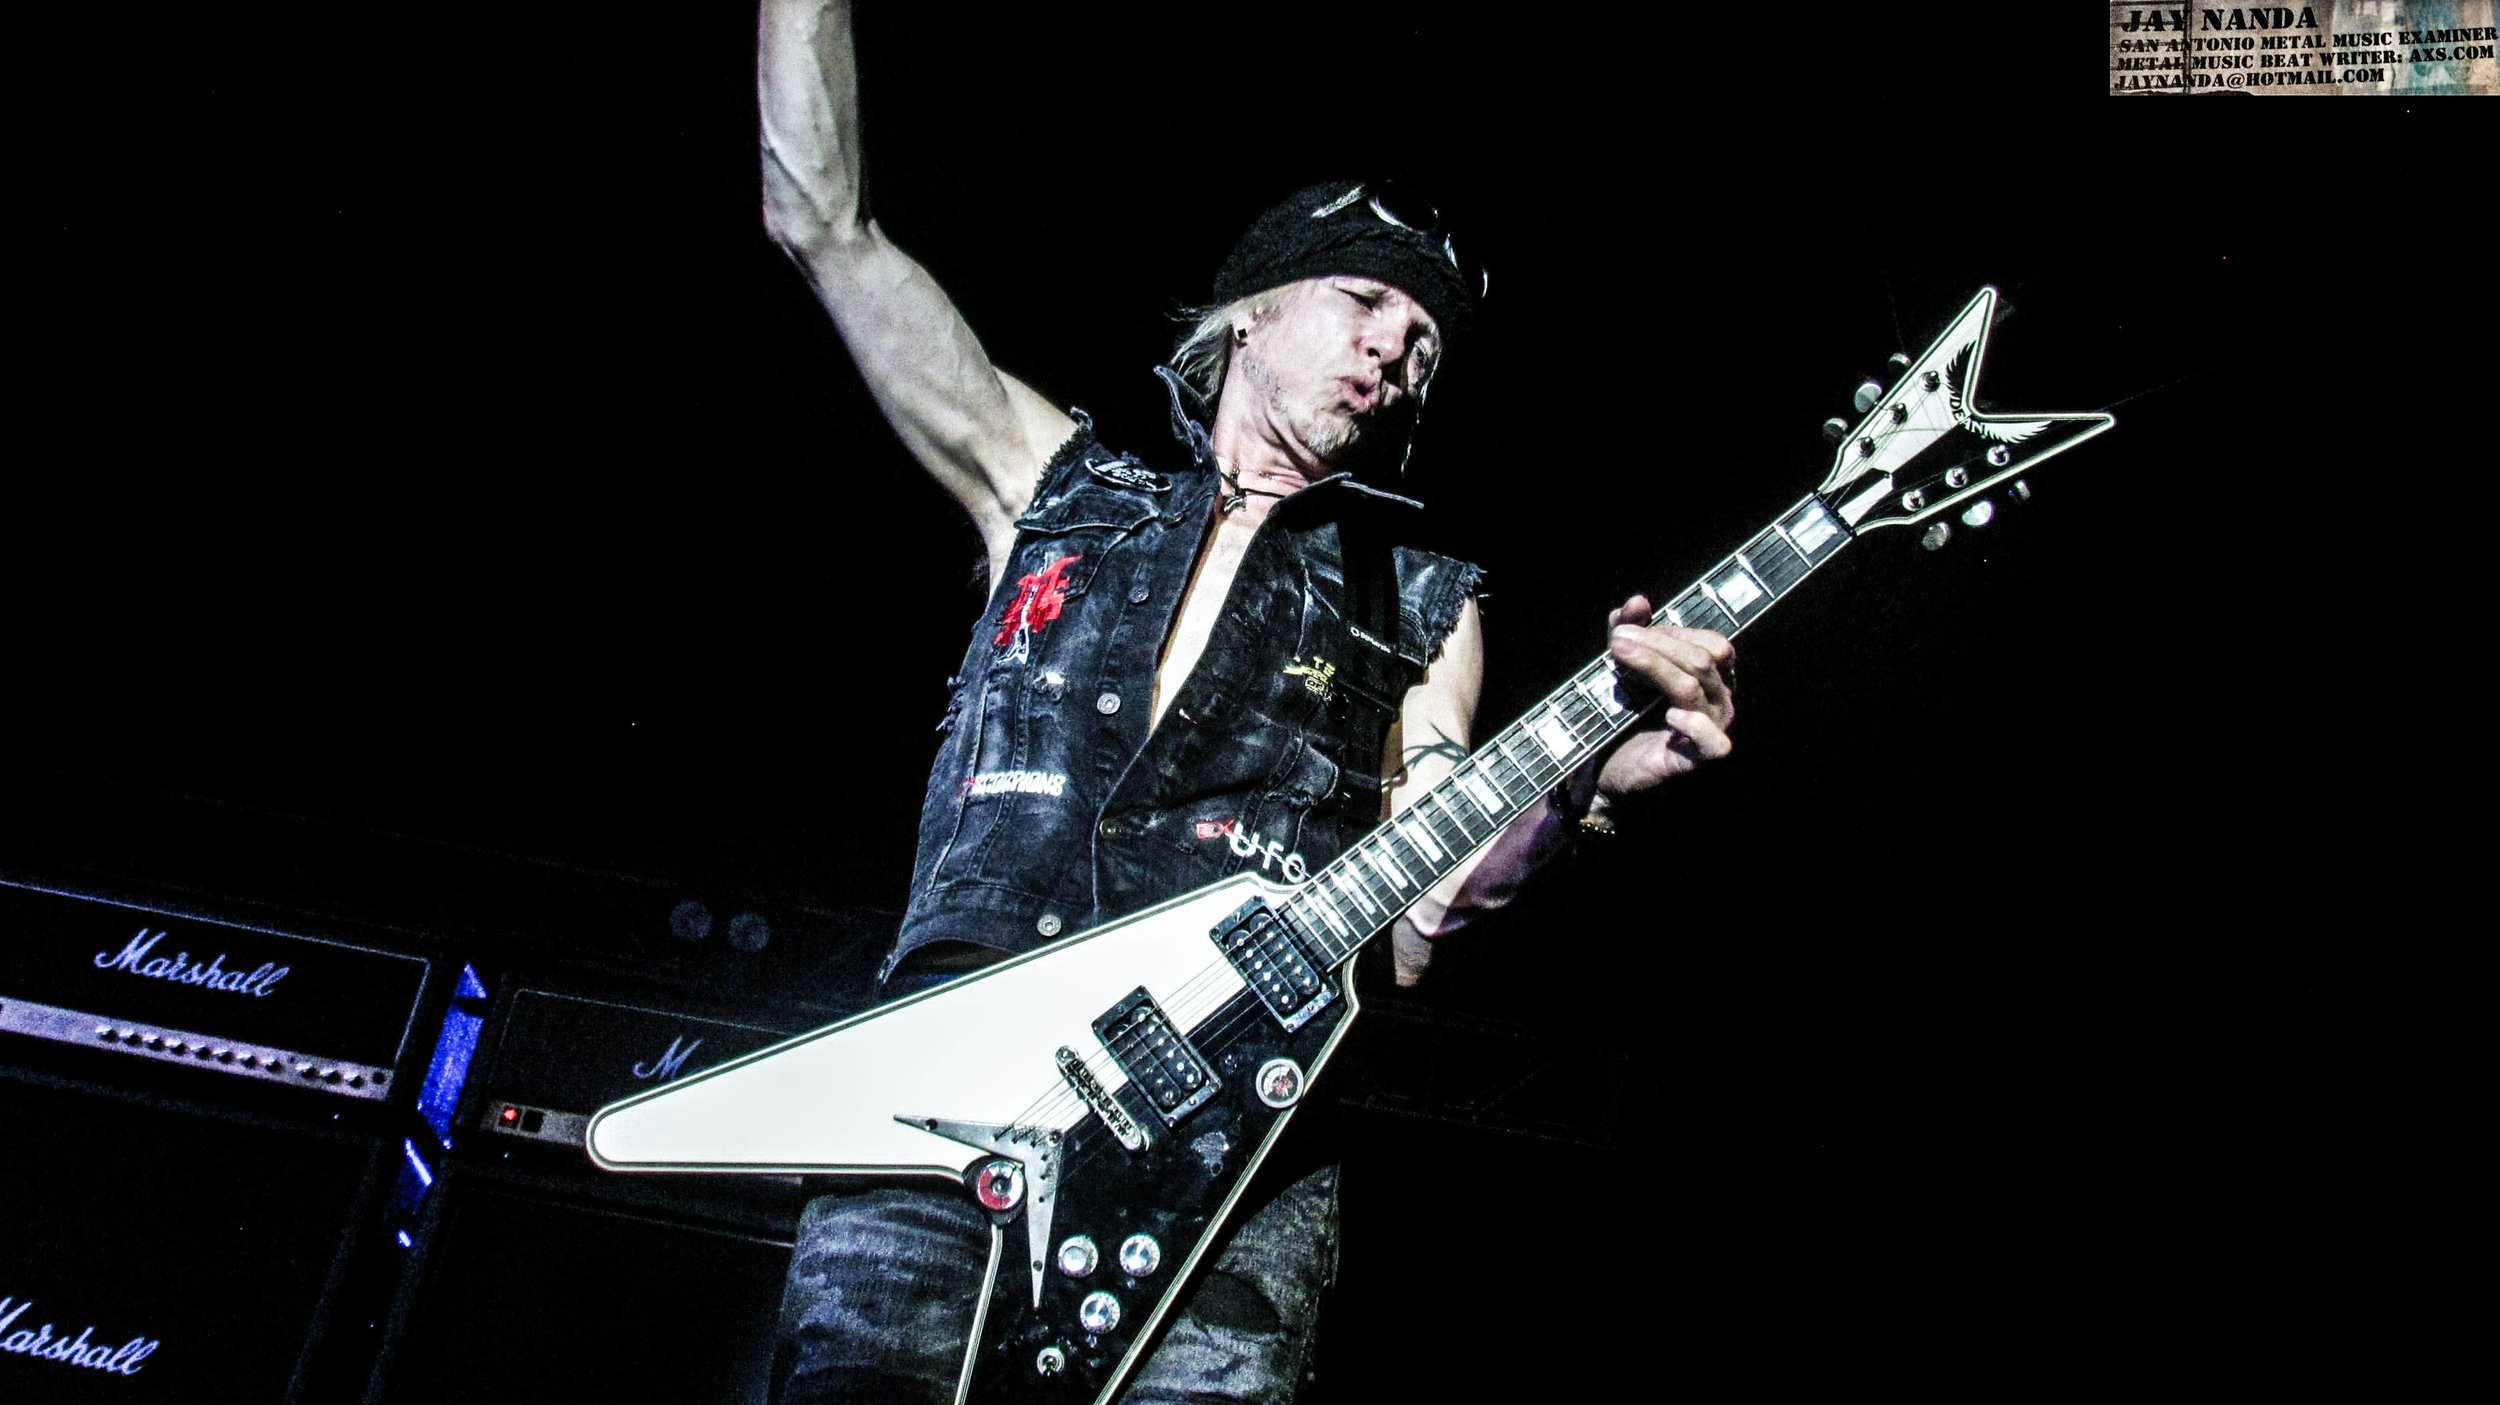  Schenker utilized this guitar for most of the evening. 